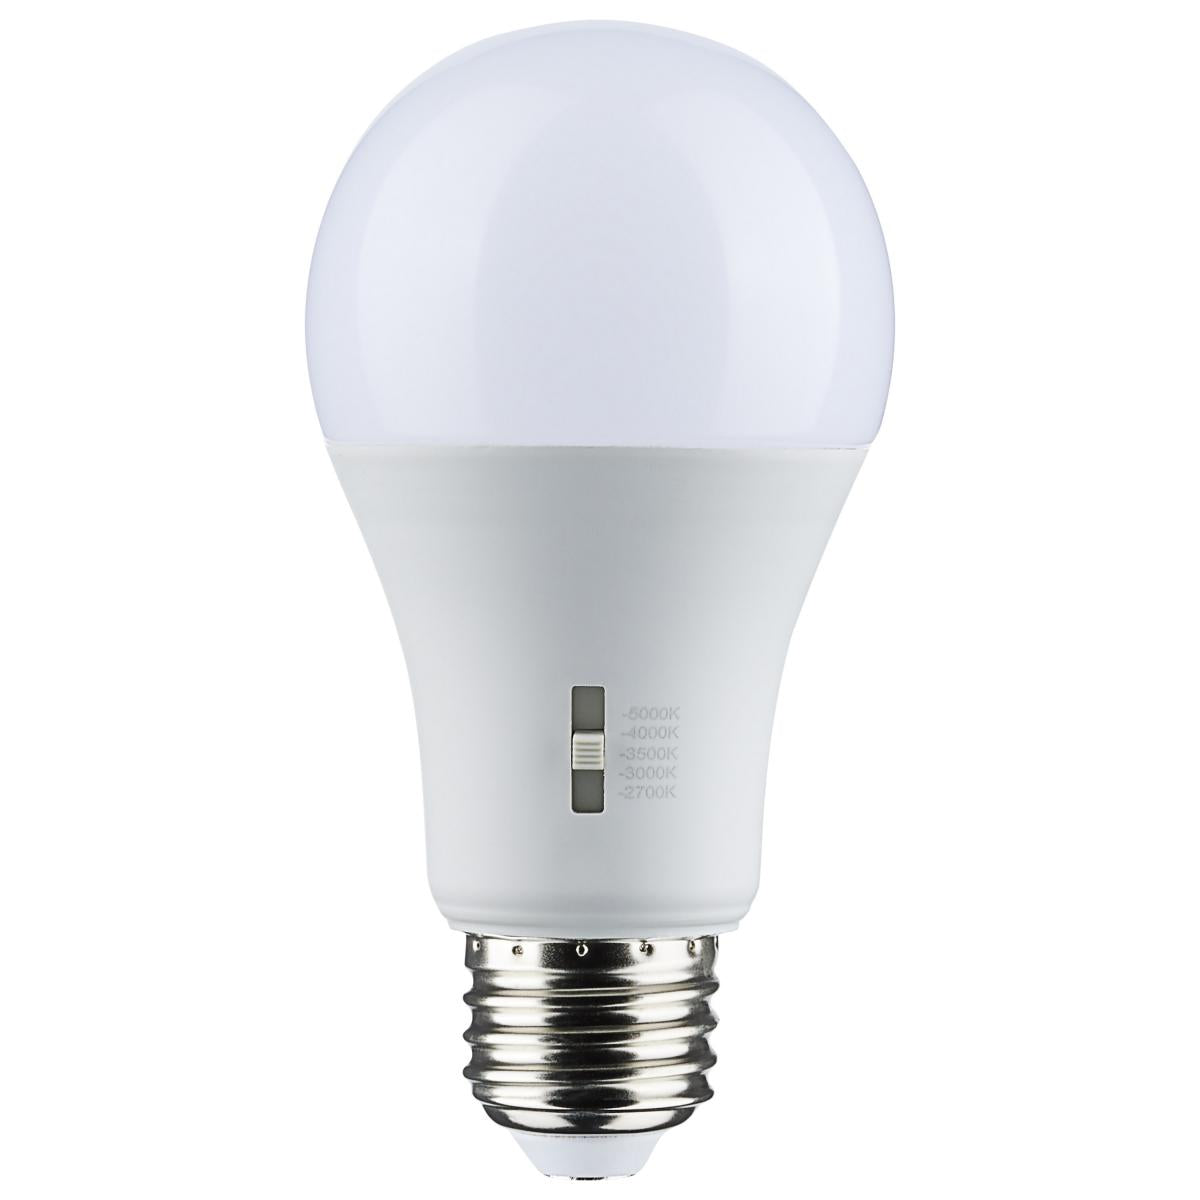 A19 LED Bulb, 40W Equivalent, 5 Watt, 450 Lumens, Selectable CCT 2700K to 5000K, E26 Medium Base, Frosted Finish - Bees Lighting